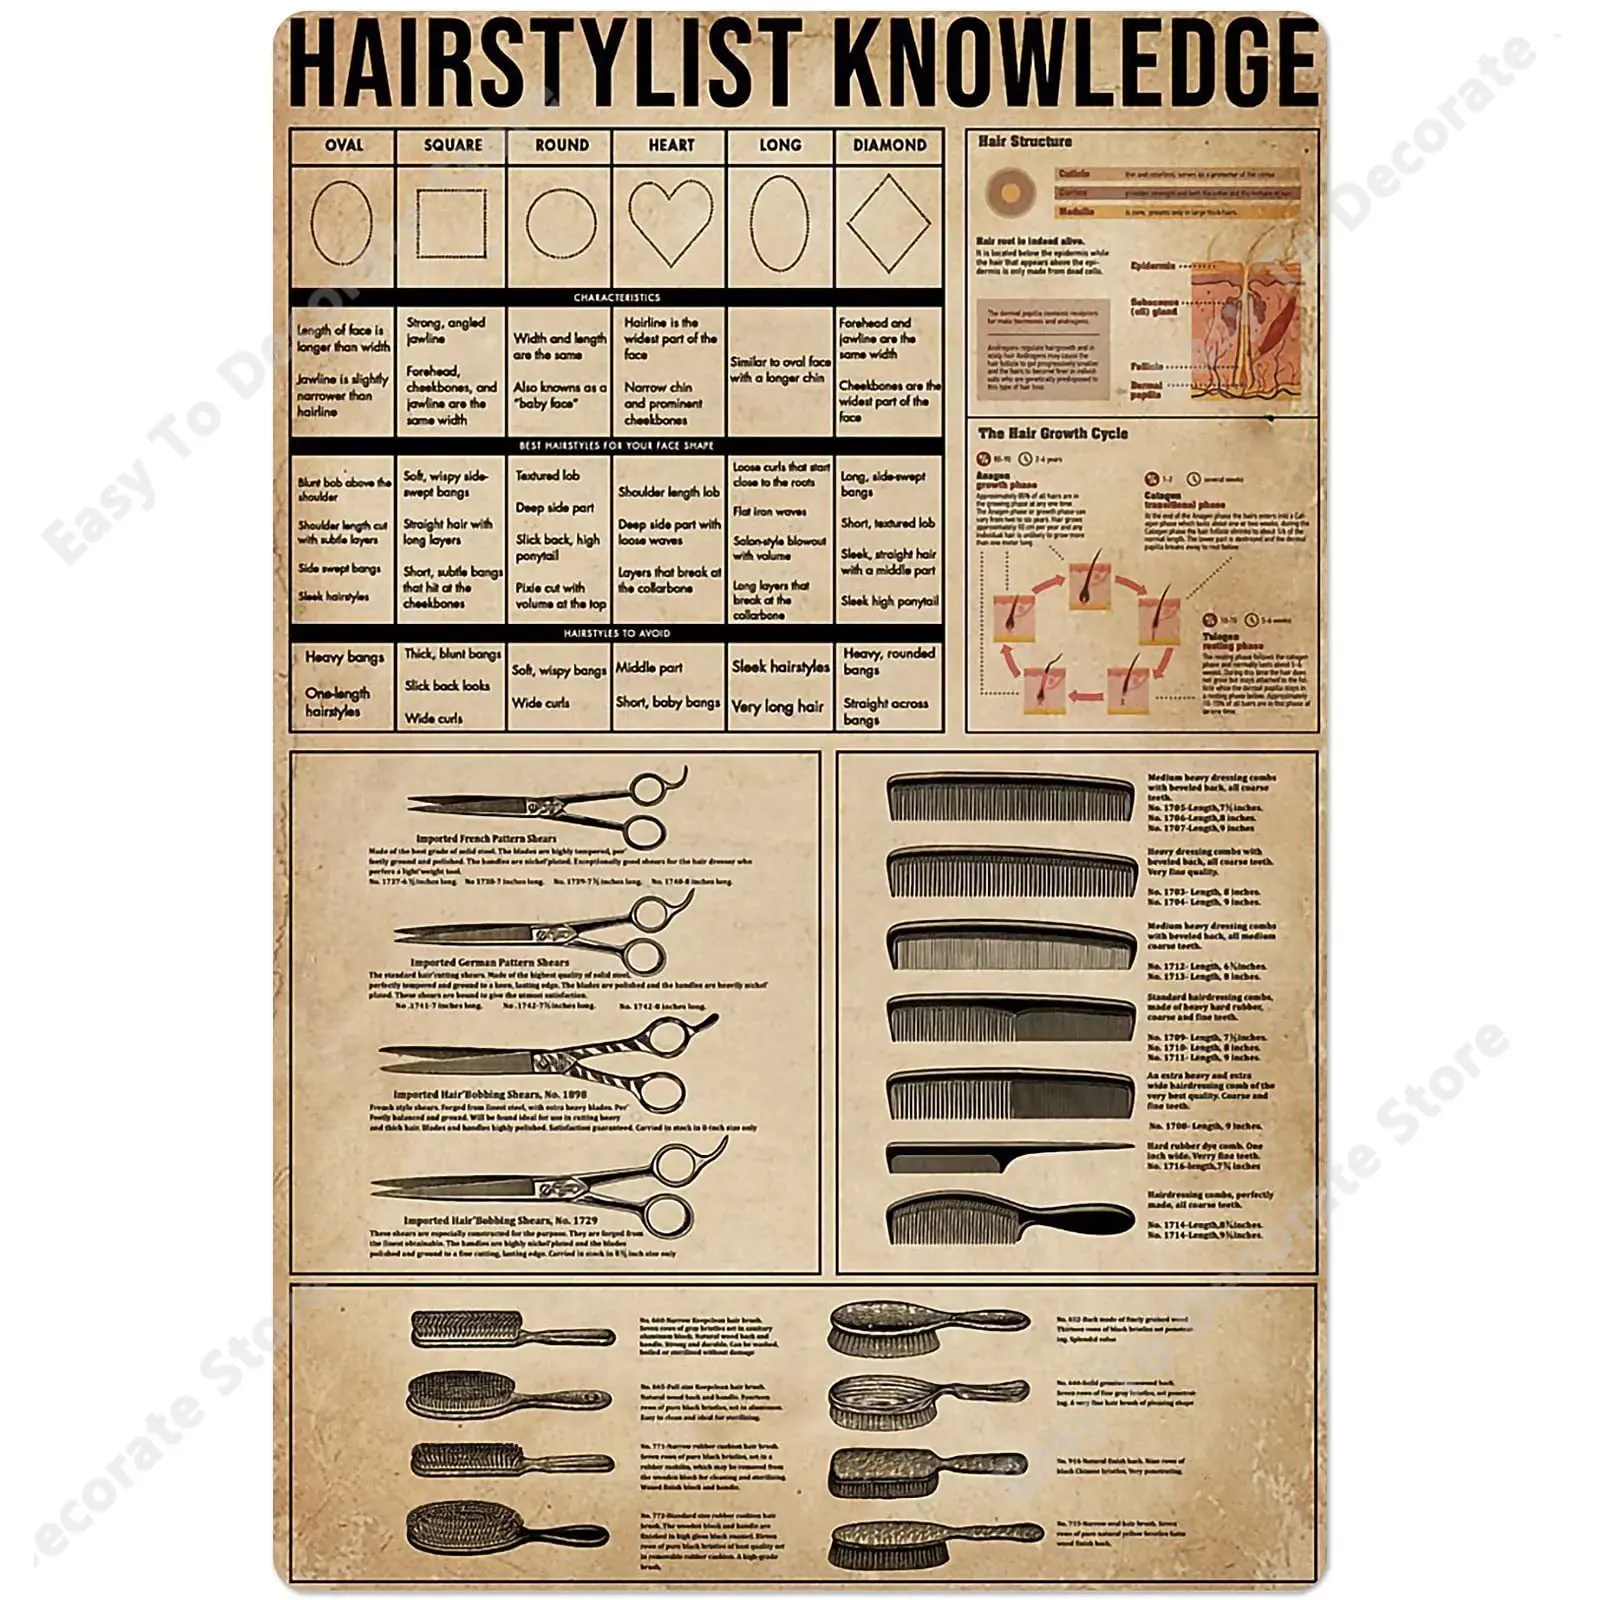 

A Hairstylist Knowledge Metal Tin Sign Barber Tools Chart Poster Barber Shop Club Home Wall Decoration Plaque